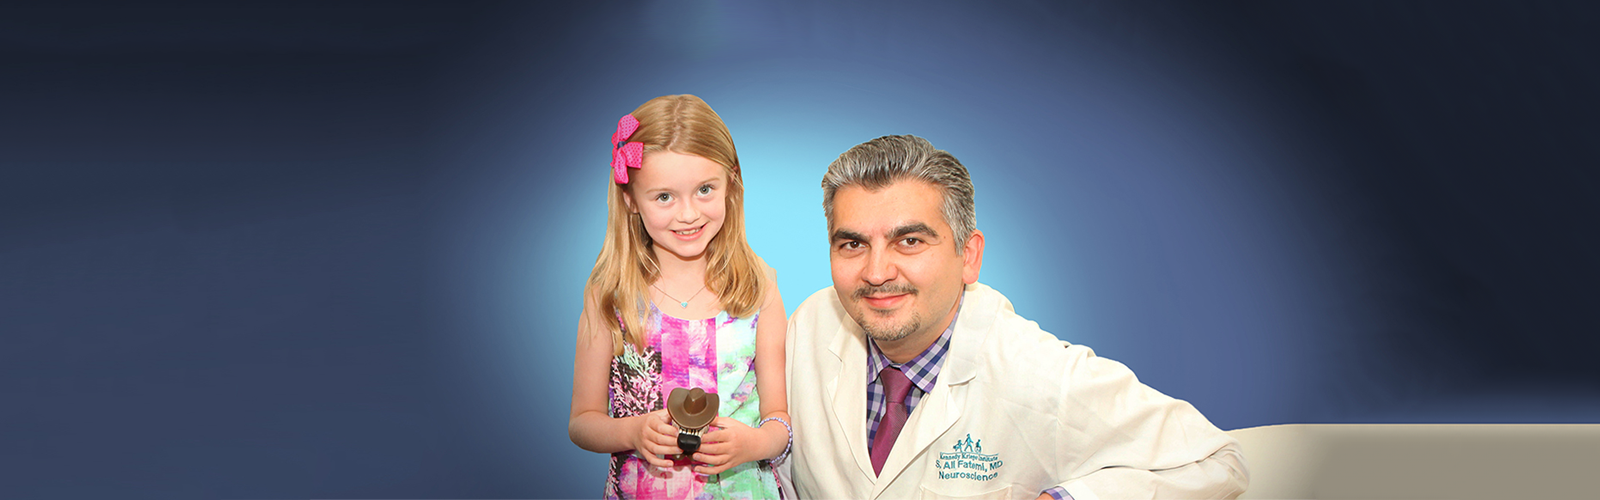 Dr. Ali Fatemi and a patient smiling.